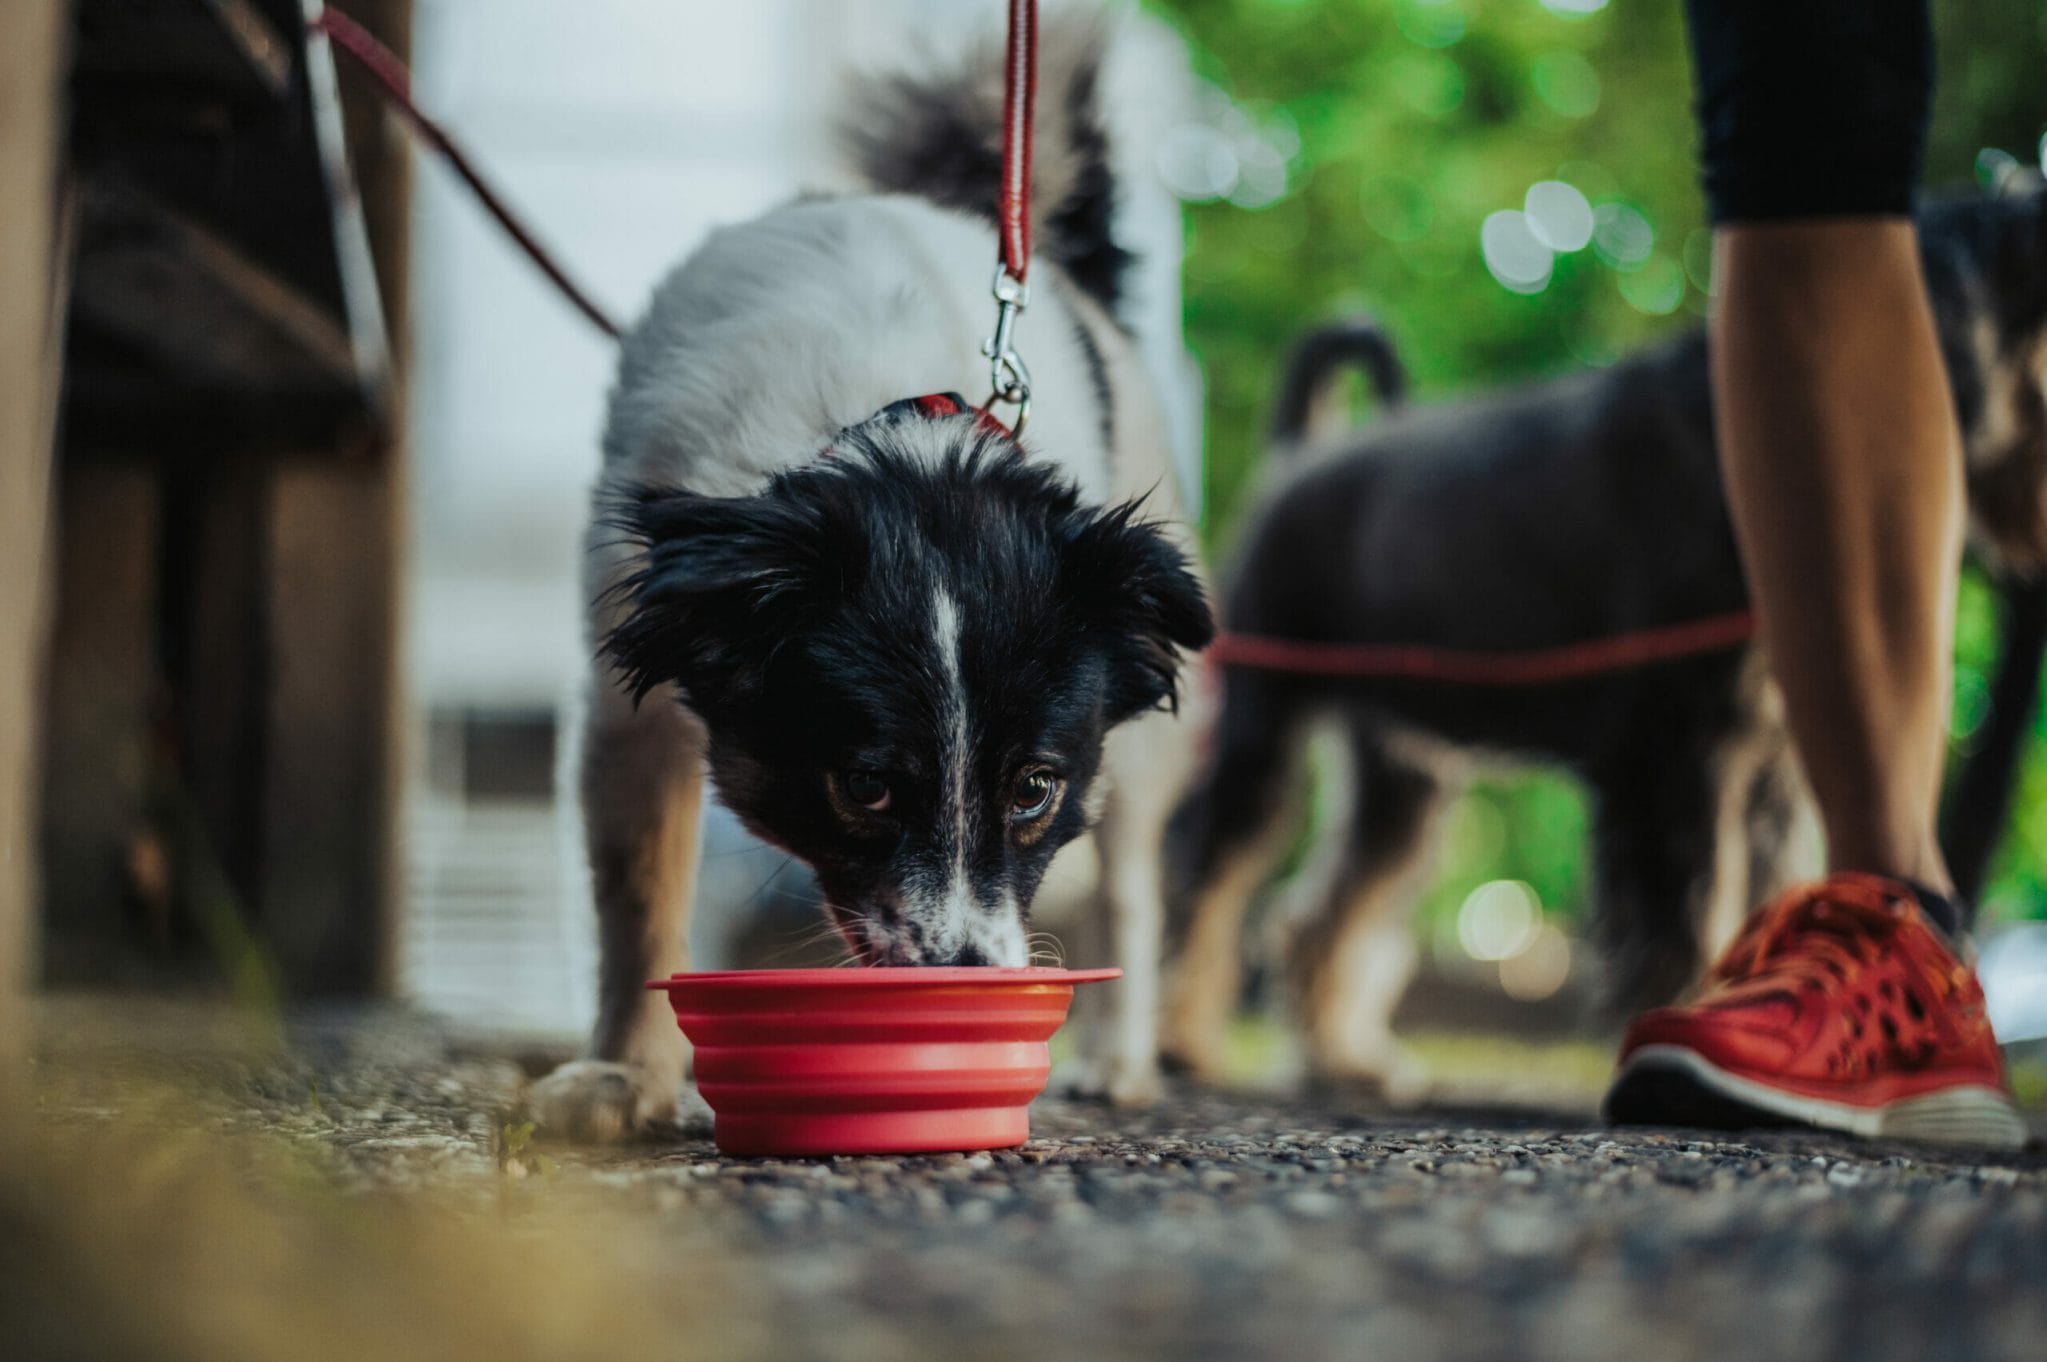 Is it okay for dogs to share the same bowl with other dogs?